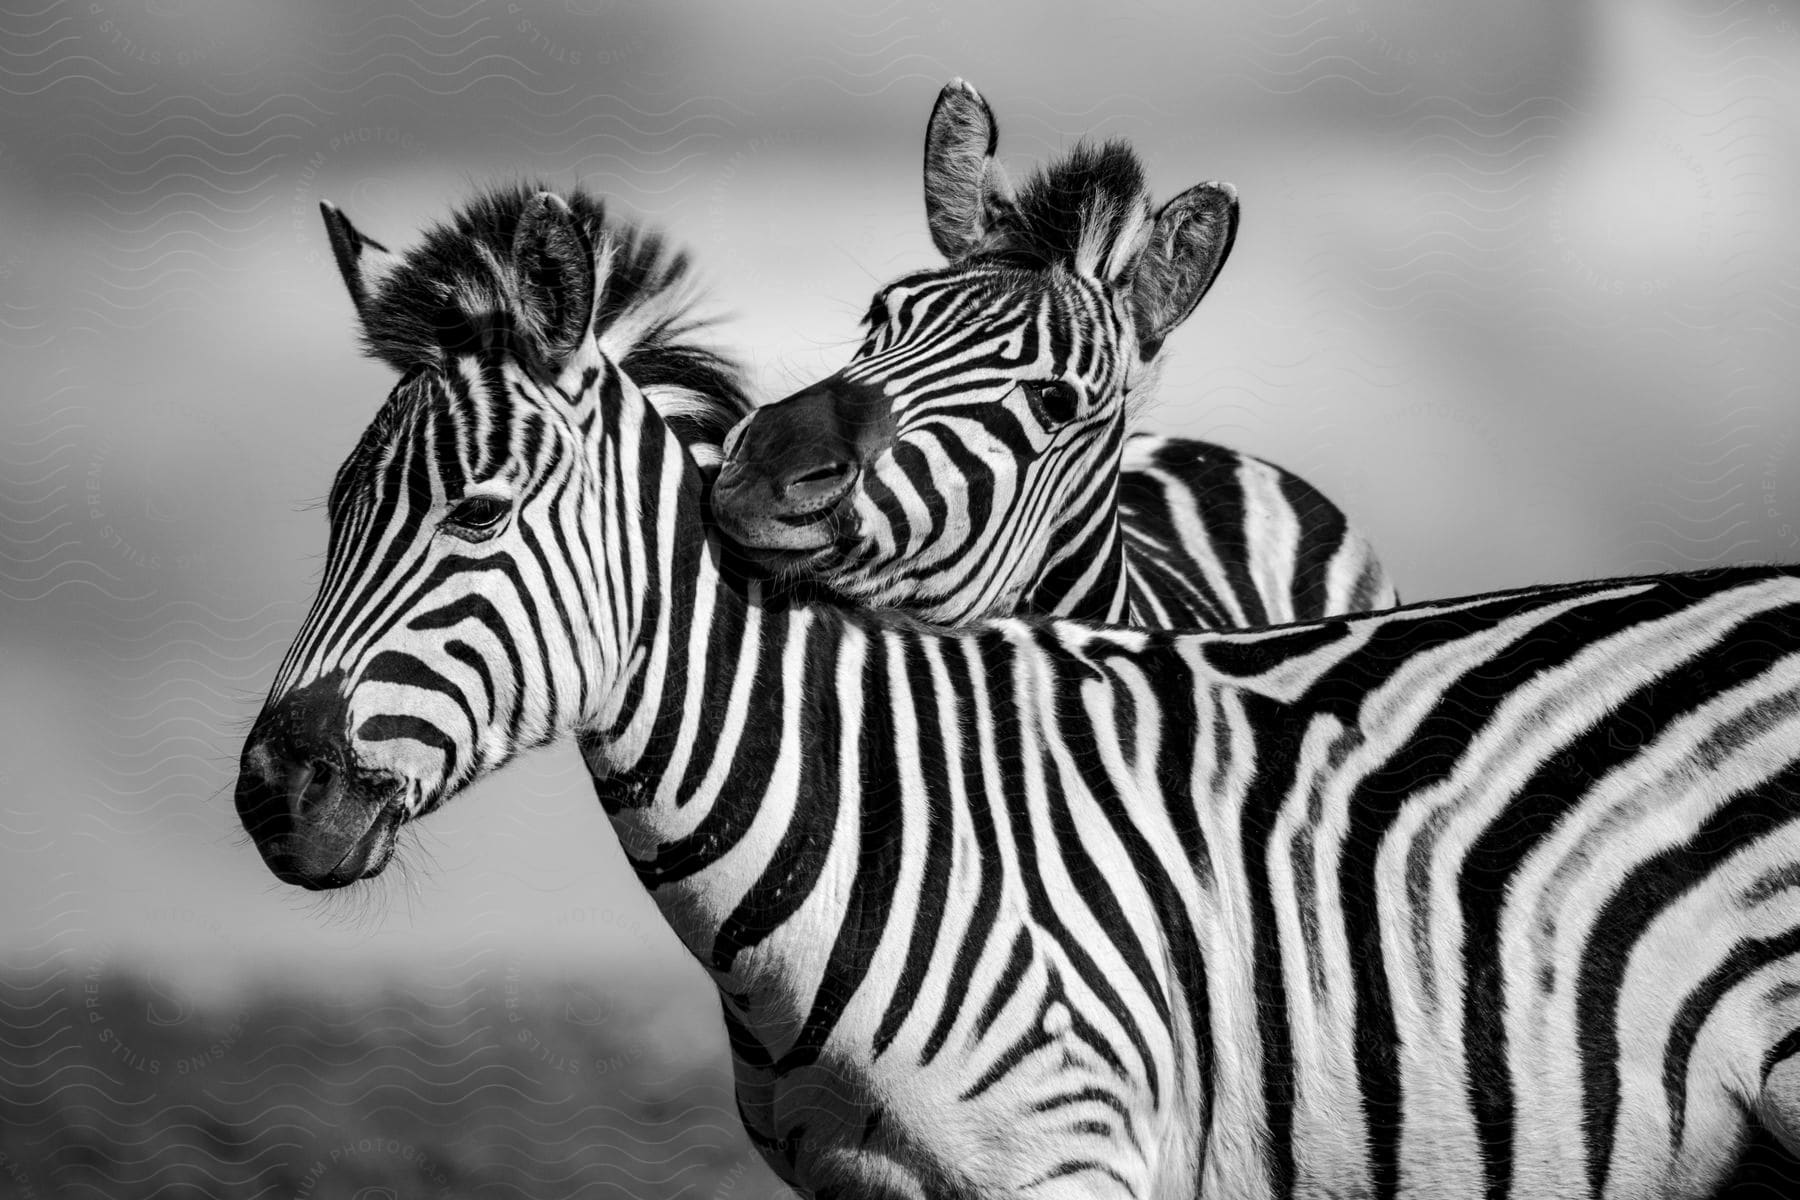 Two zebras close together in black and white, one facing forward, the other to the side.